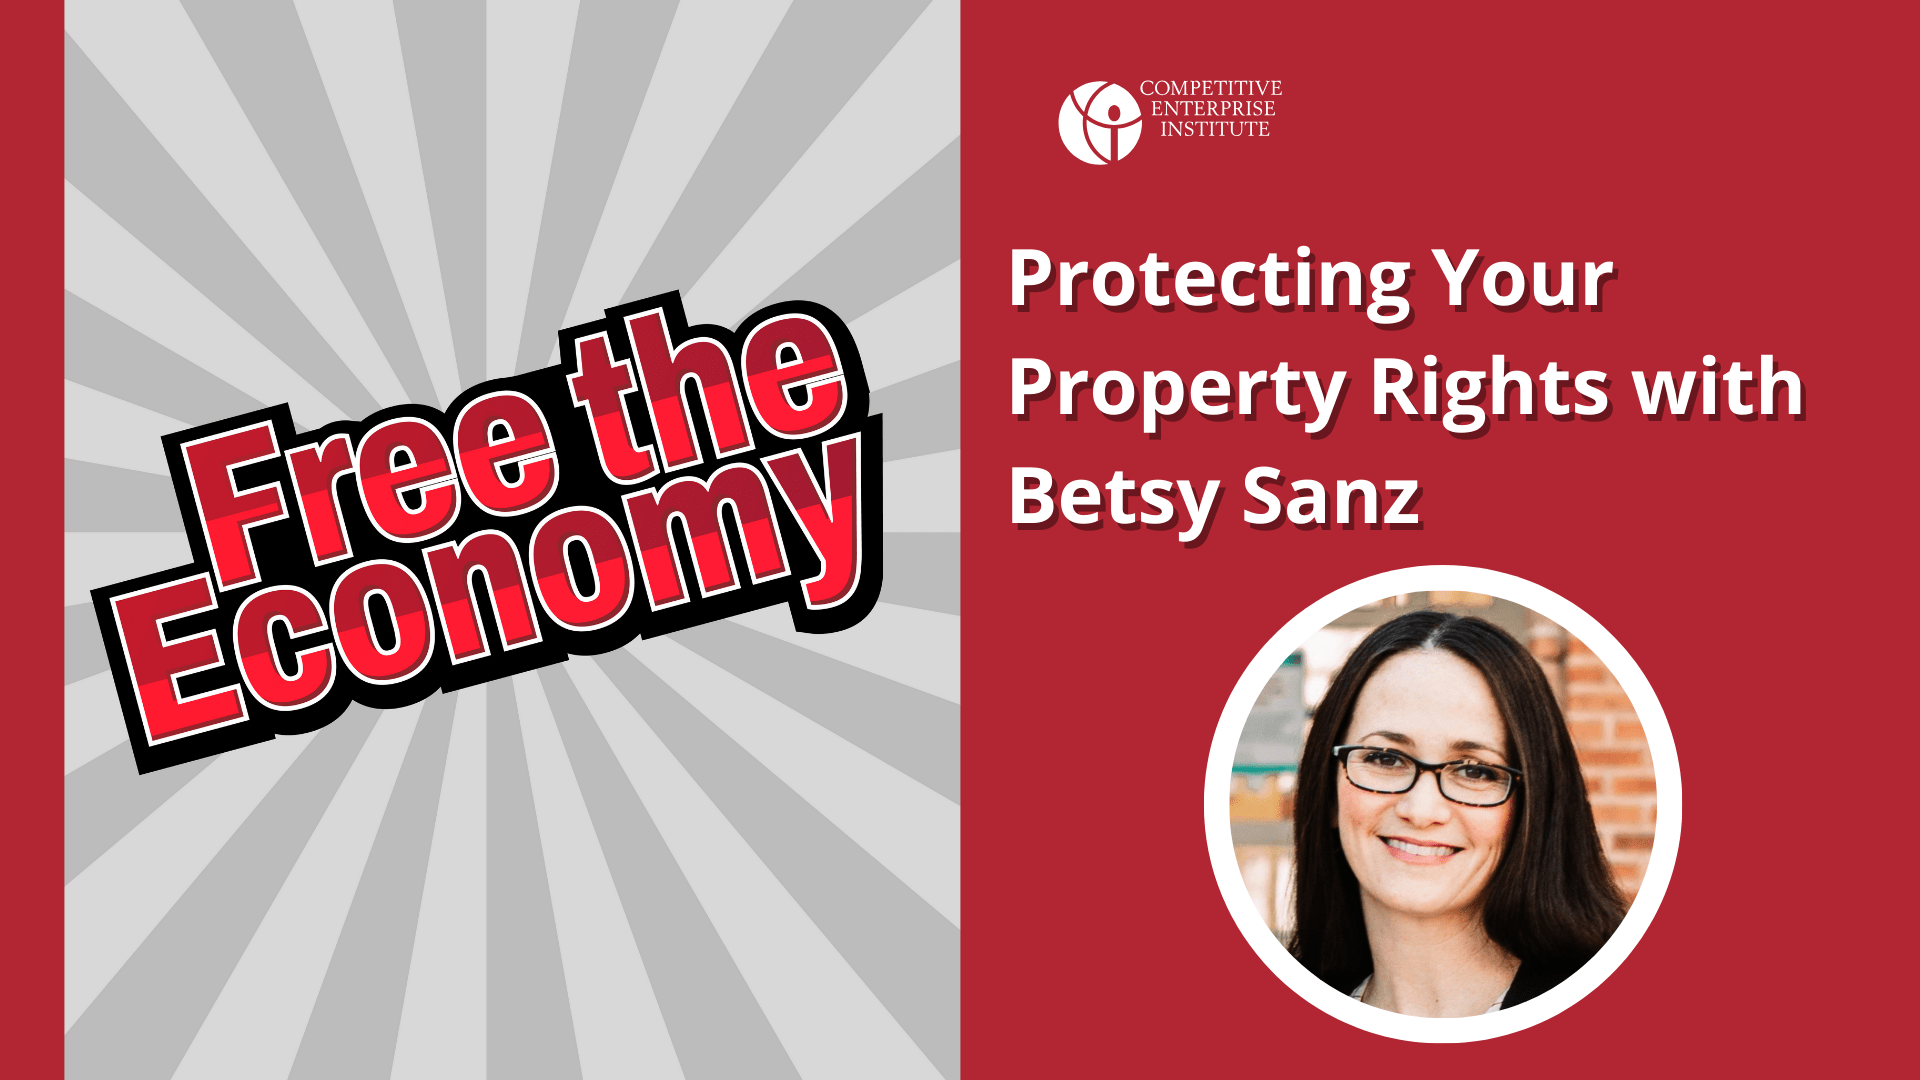 Protecting Your Property Rights with Betsy Sanz